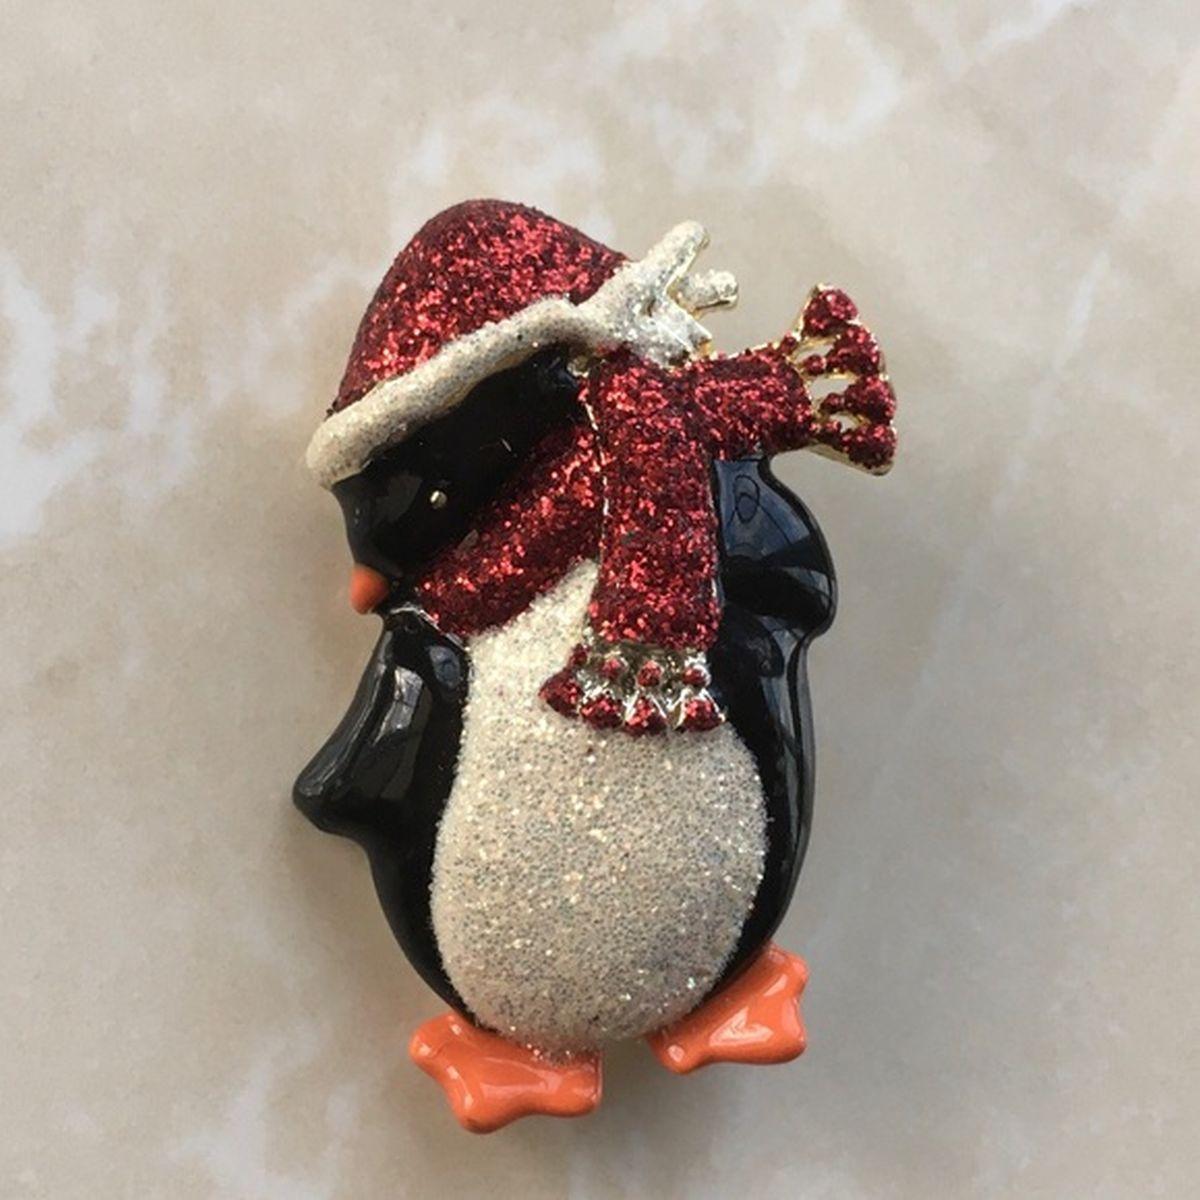 Simply Wonderful! Penguin with Sassy Personality! Vintage Designer Signed Danecraft Enamel Penguin Brooch Pin. Enhanced with Sparkling Belly and Red Scarf. Measuring approx. 1